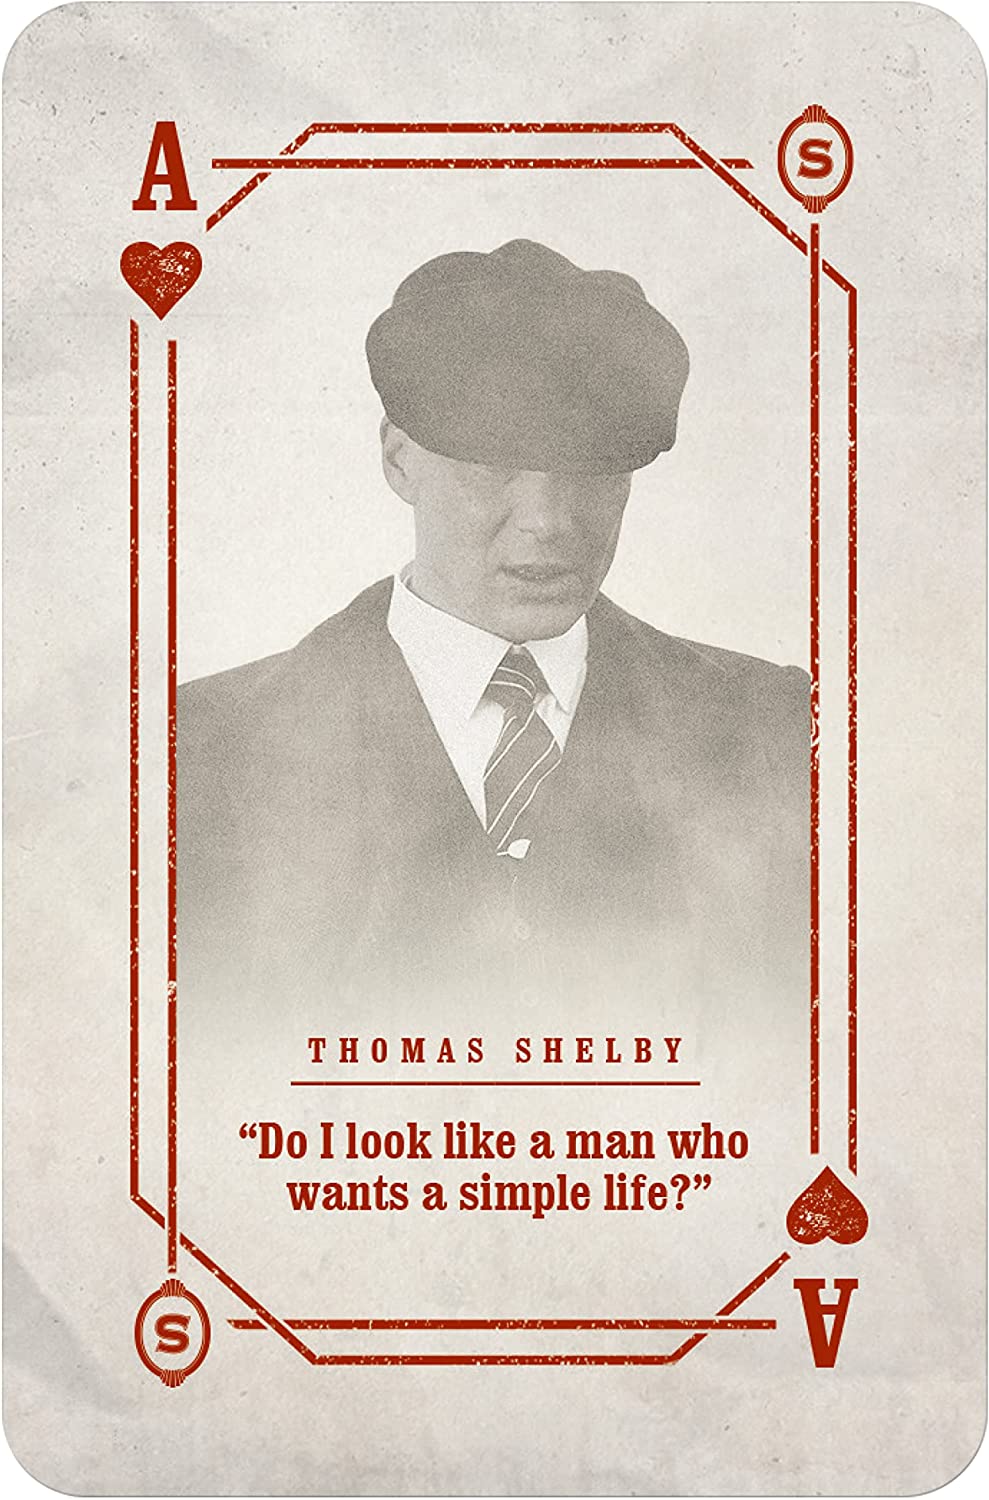 Waddingtons - Peaky Blinders Playing Cards